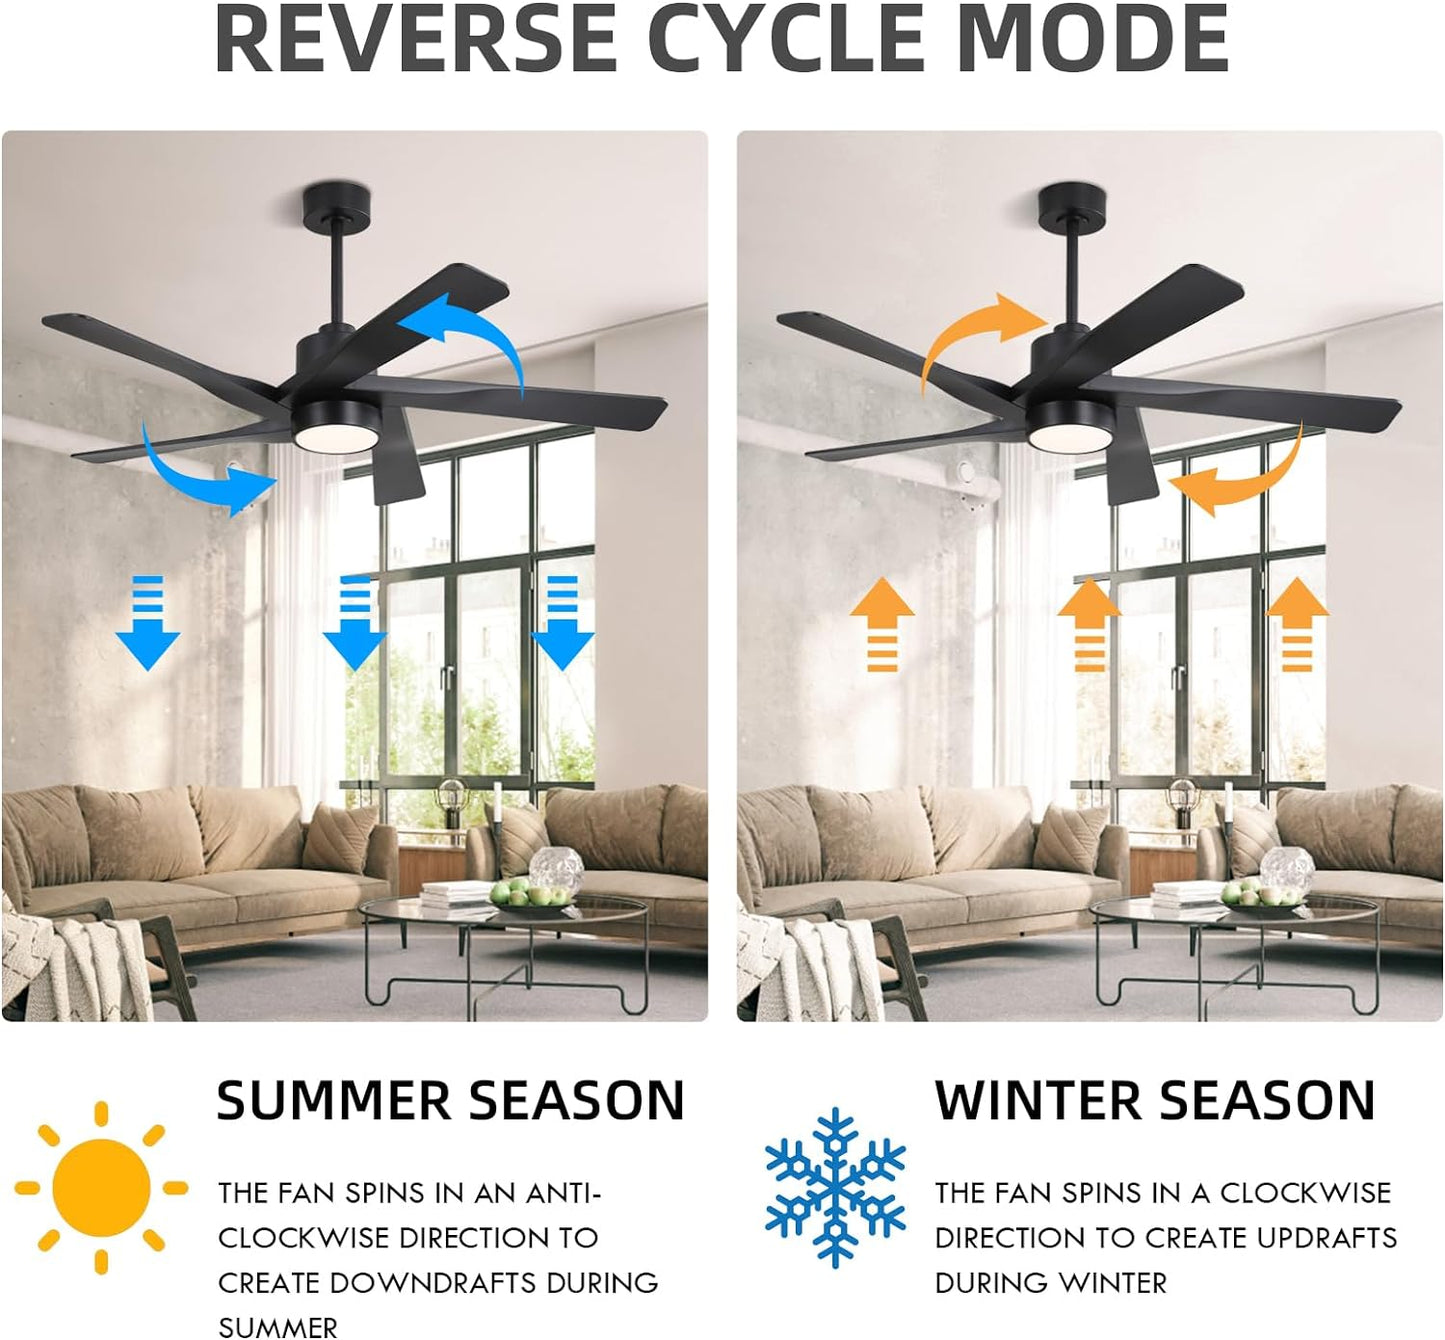 WINGBO 54" ABS DC Ceiling Fan with Lights, 5 Blade ABS Plastic Ceiling Fan with Remote, 6-Speed Reversible DC Motor, LED Ceiling Fan for Kitchen Bedroom Living Room, Matte Black